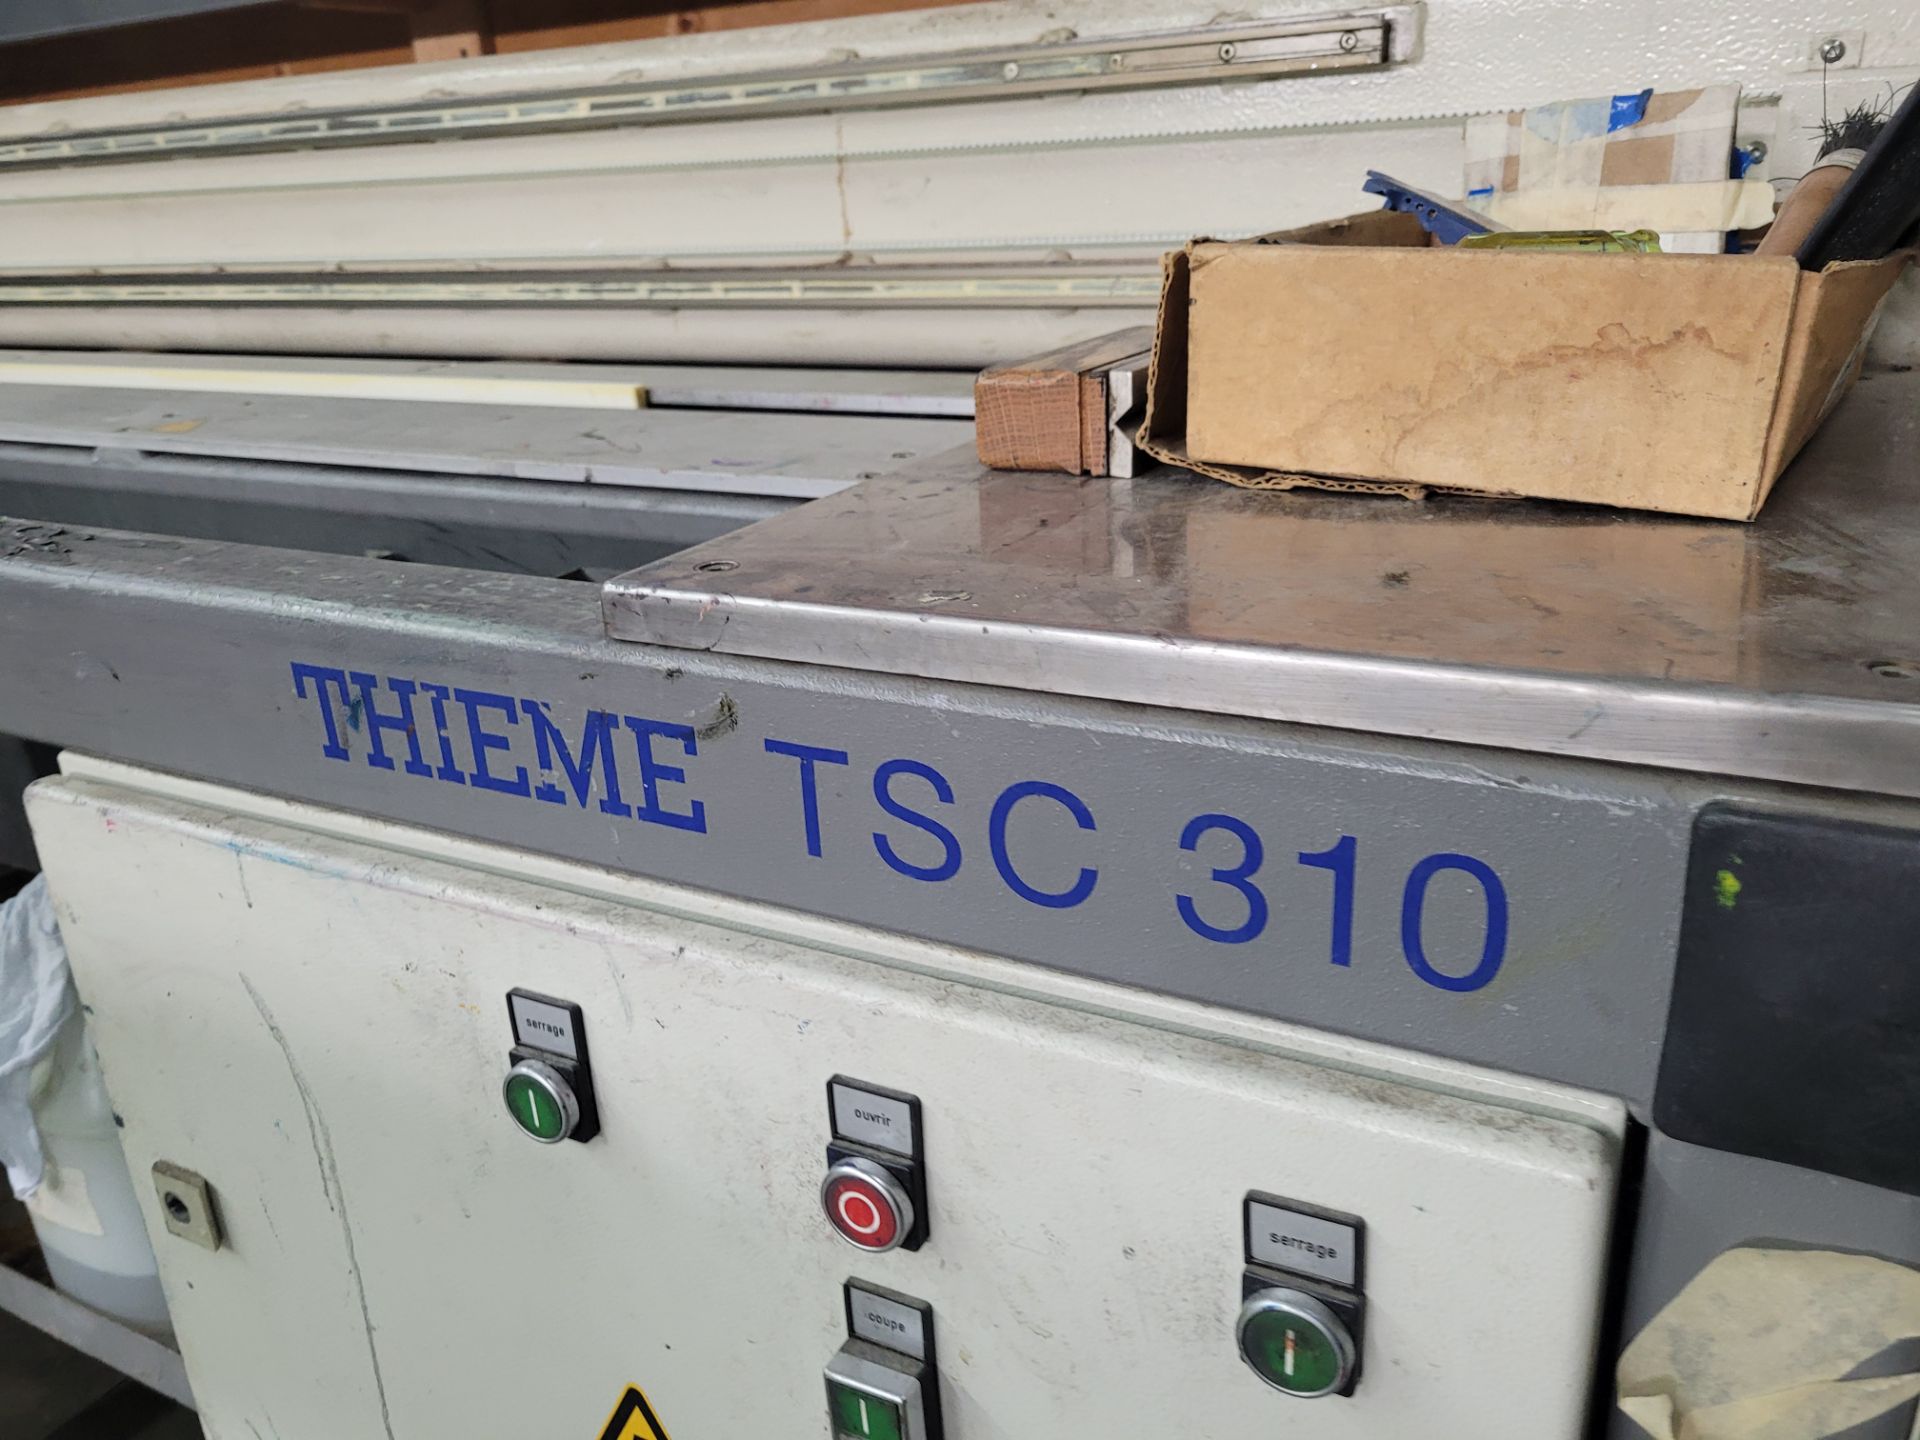 THIEME mod. TSC-310 Rotary Knife / Squeegee Cutter, 122" Length - Image 3 of 5